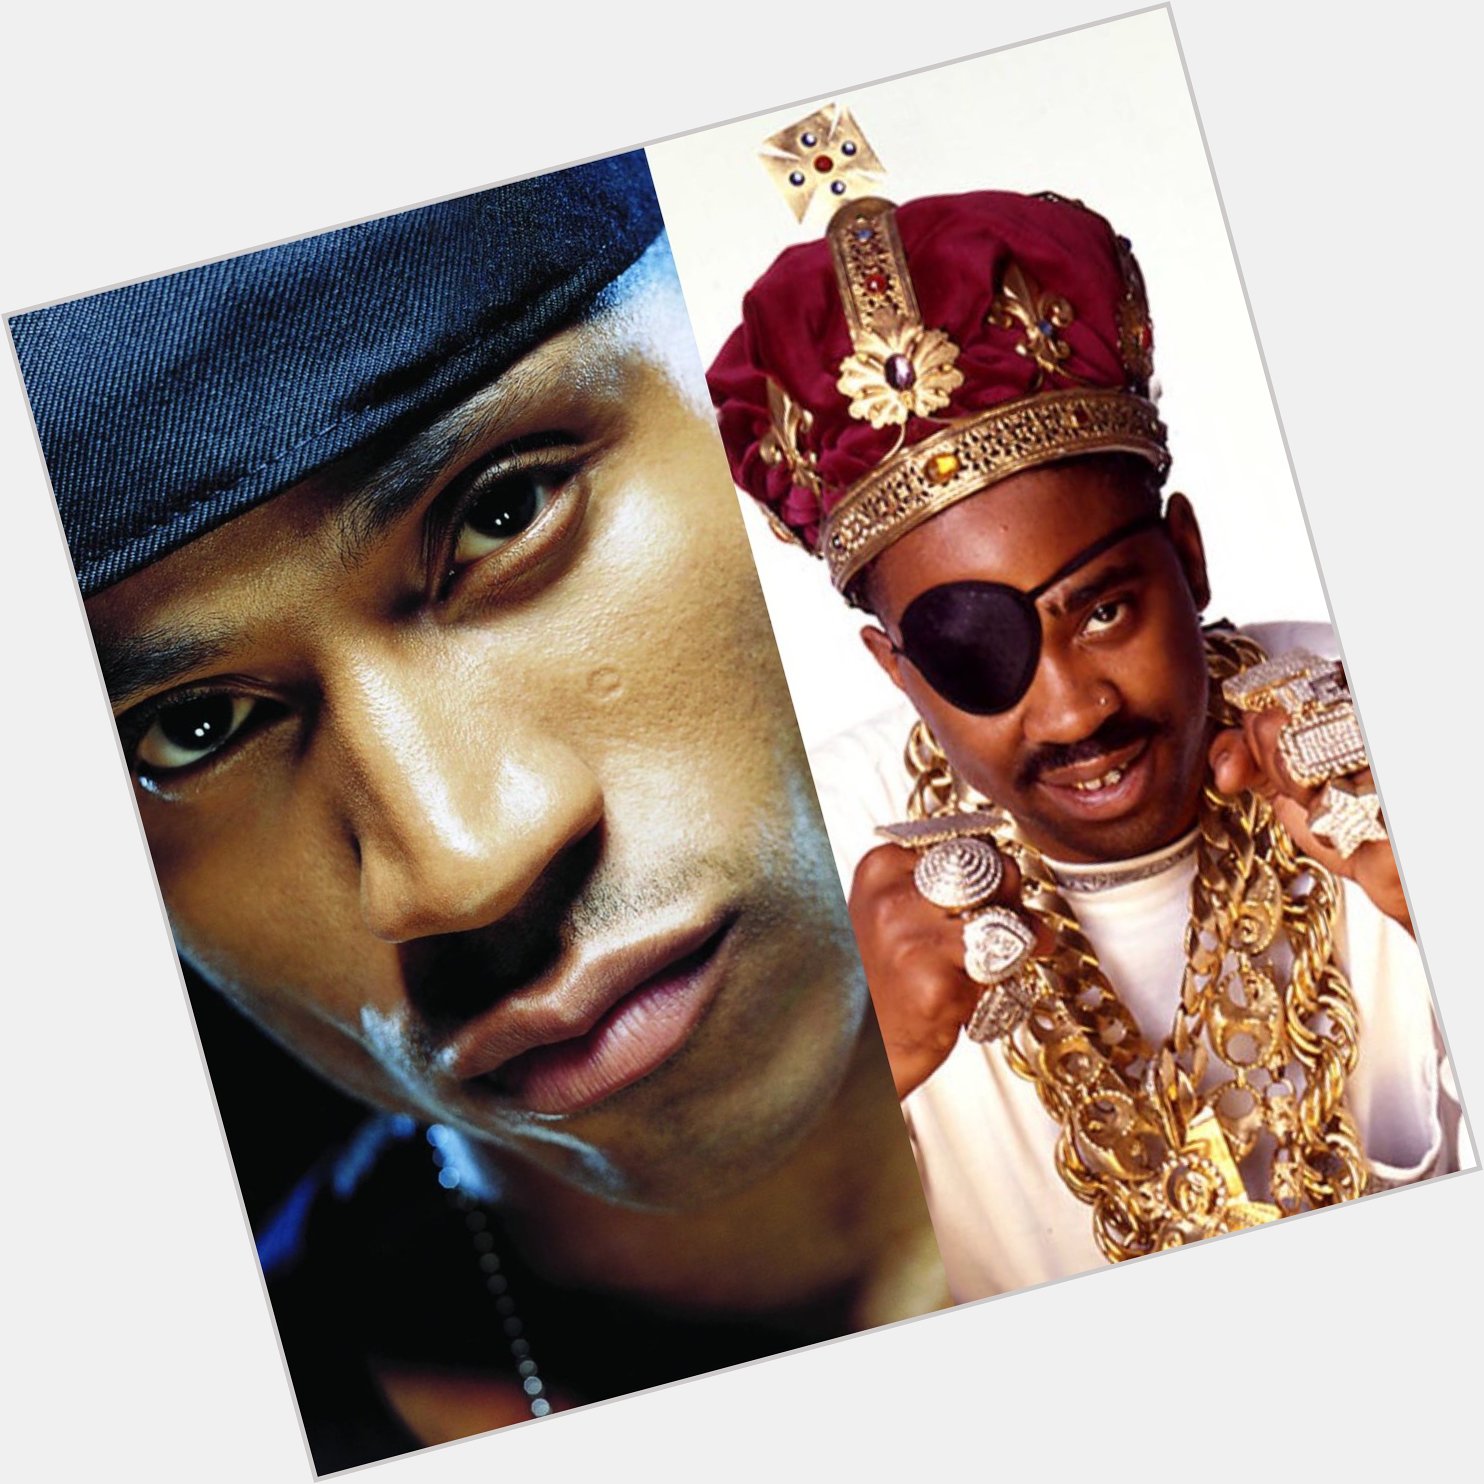 Happy birthday to the legends G.O.A.T. LL Cool J and Slick Rick                